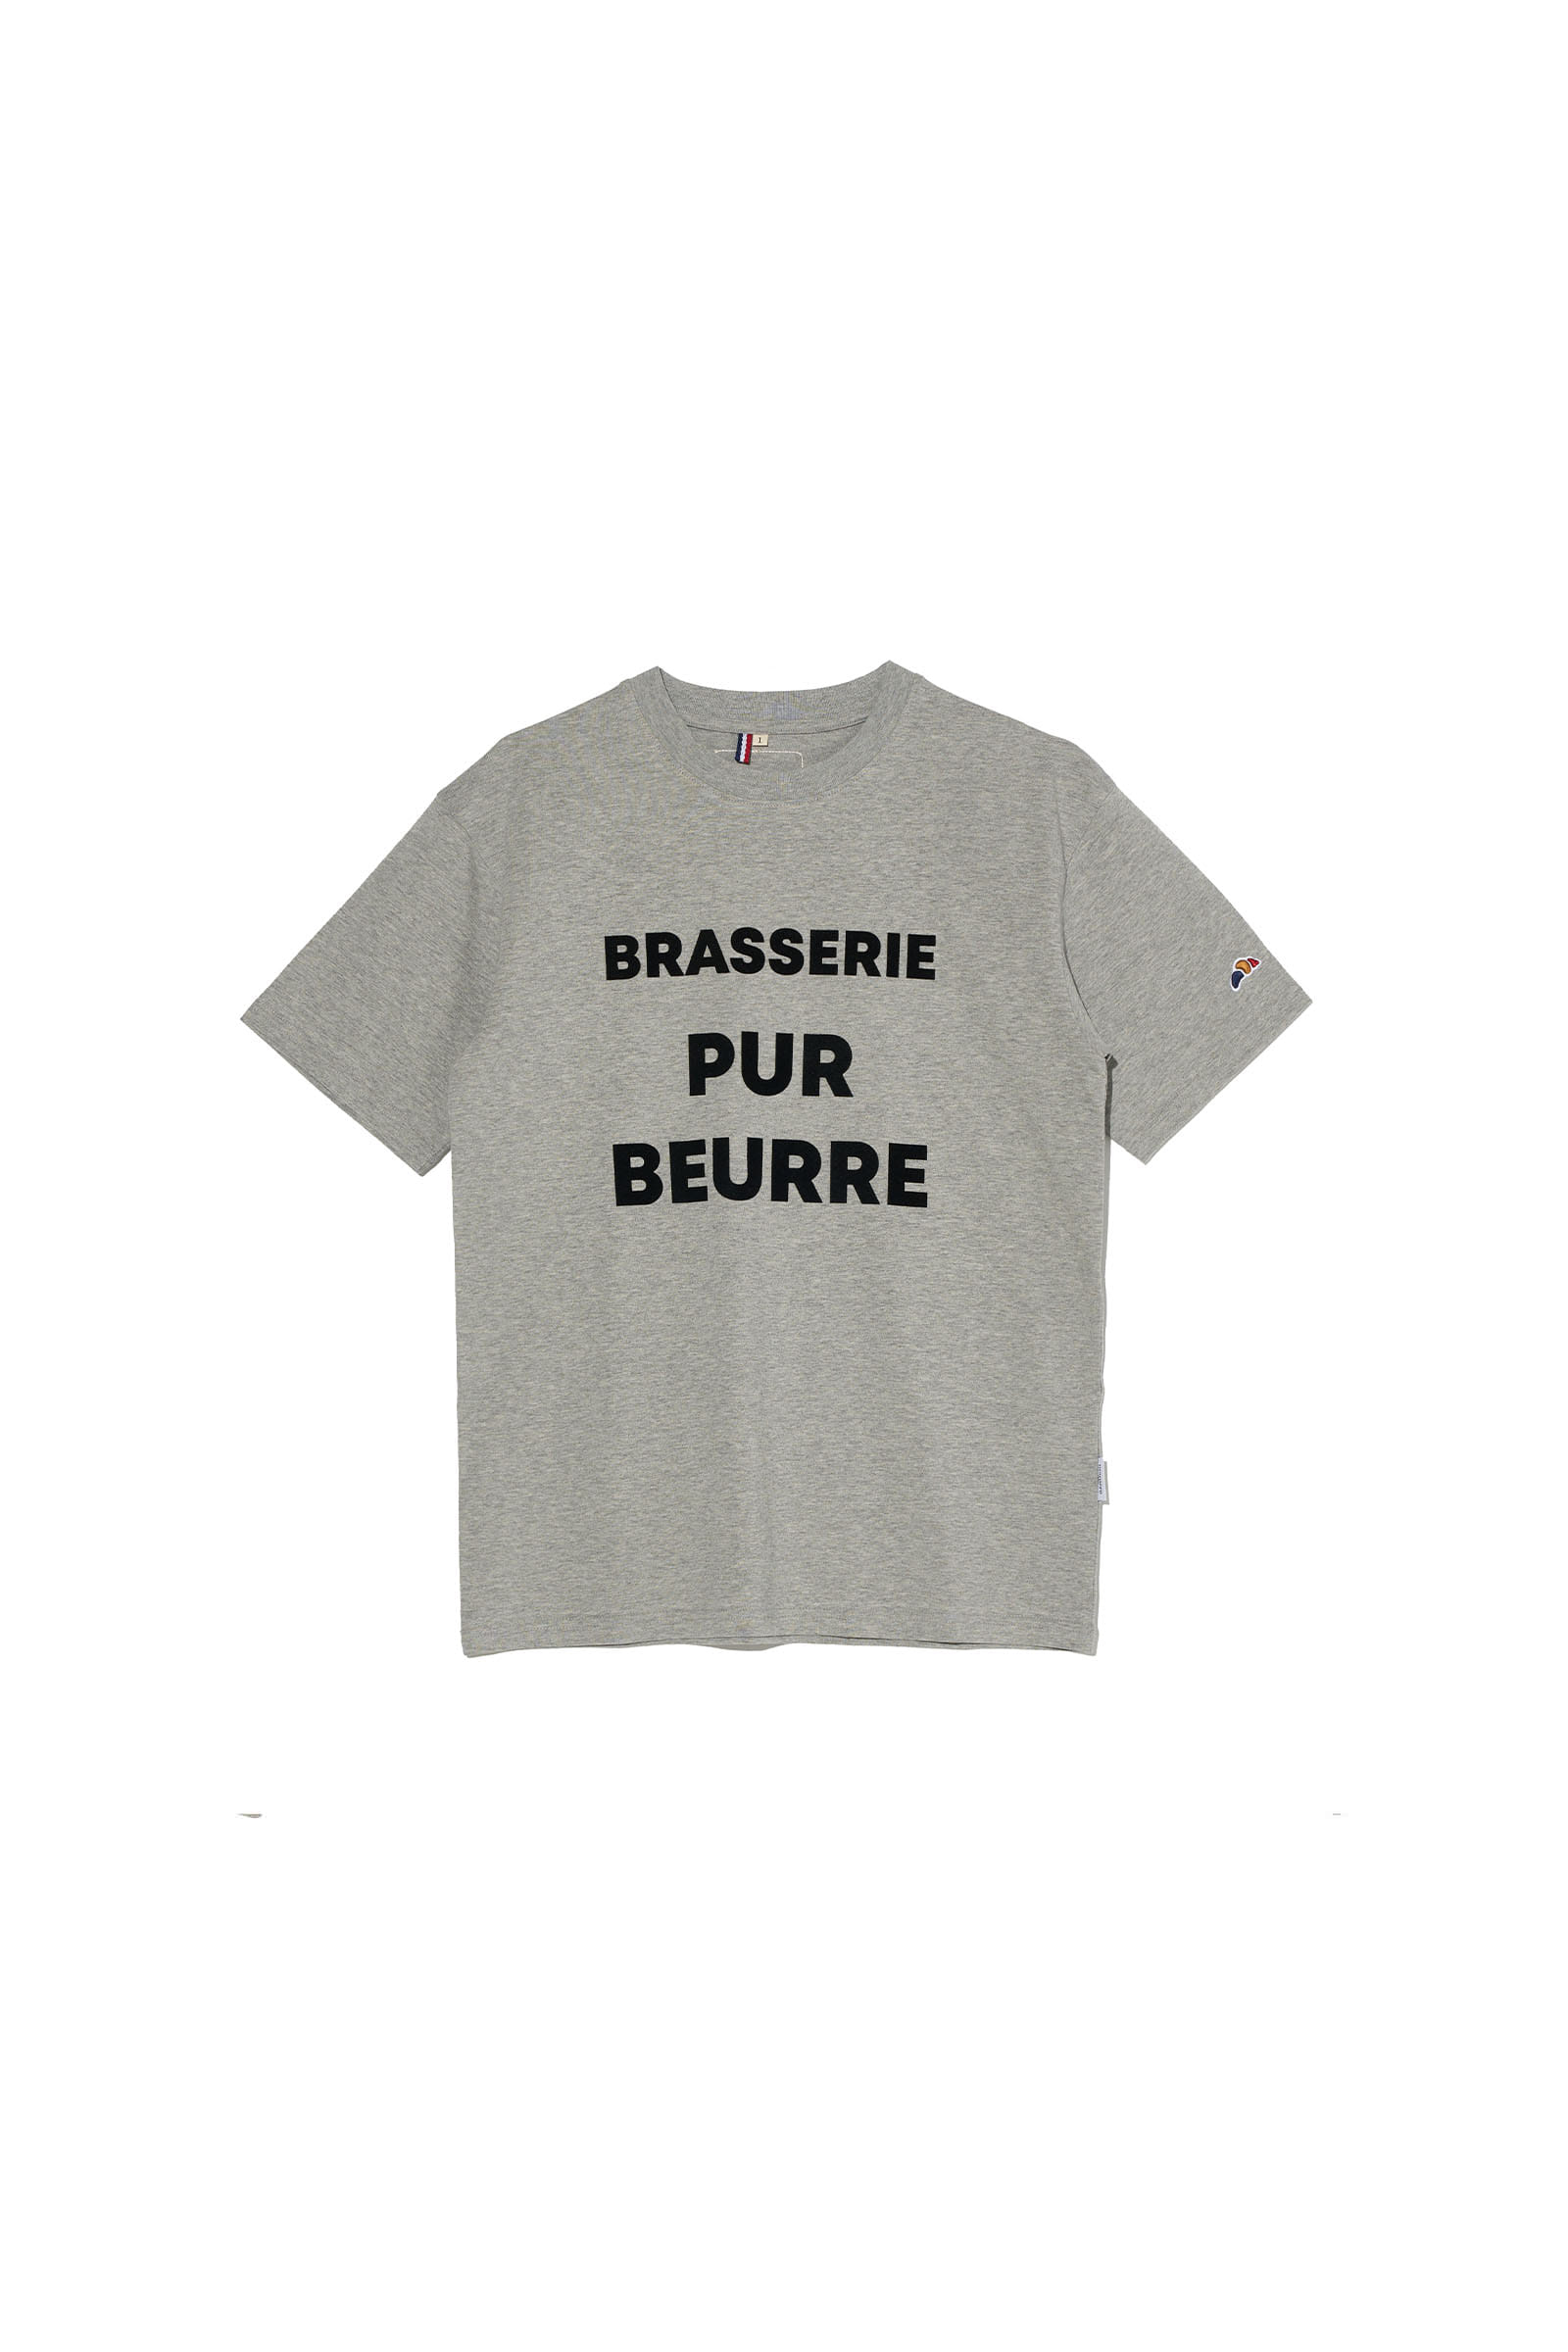 ep.6 Pur Beurre T-shirts (Grey)